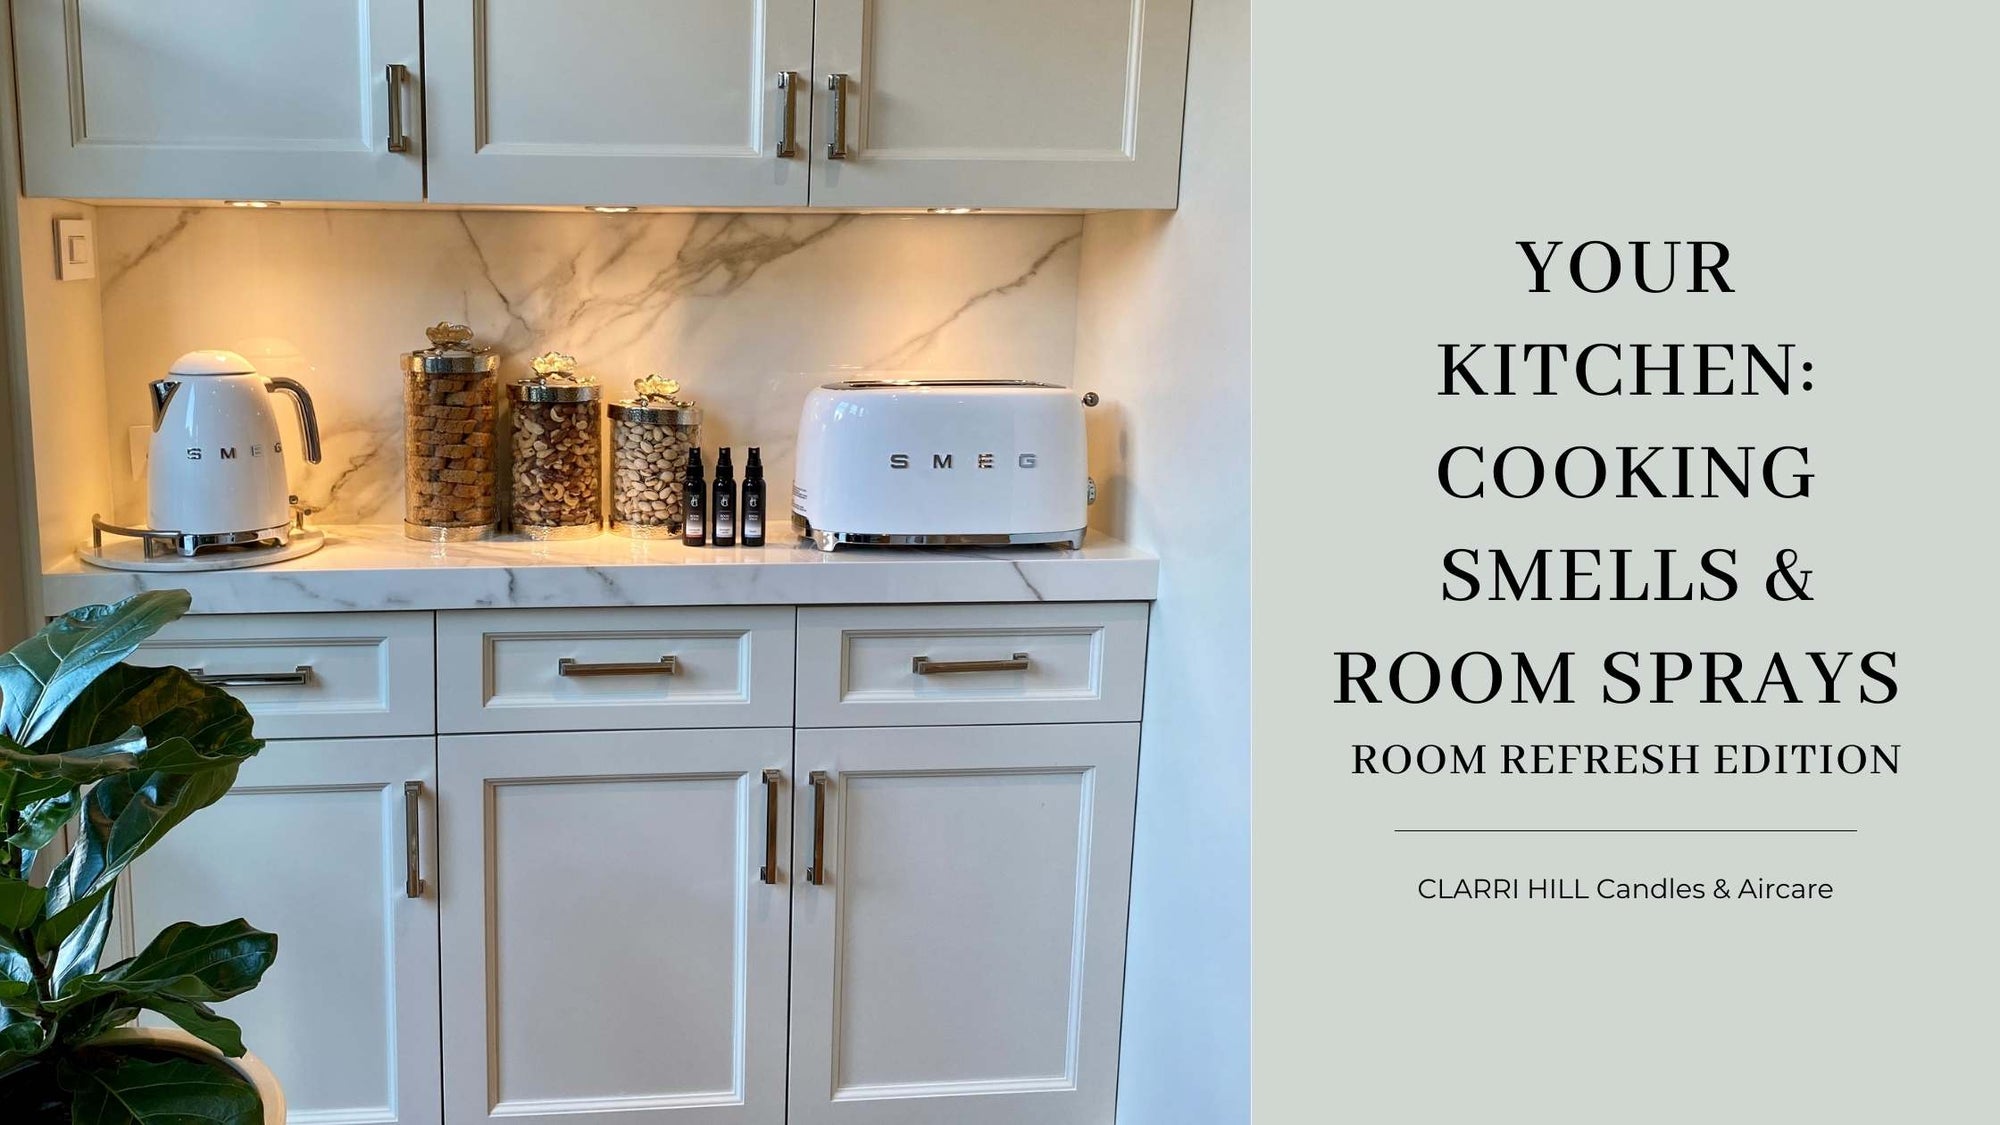 Your Kitchen – Cooking Smells & Room Sprays | Room Refresh Edition  | Clarri Hill